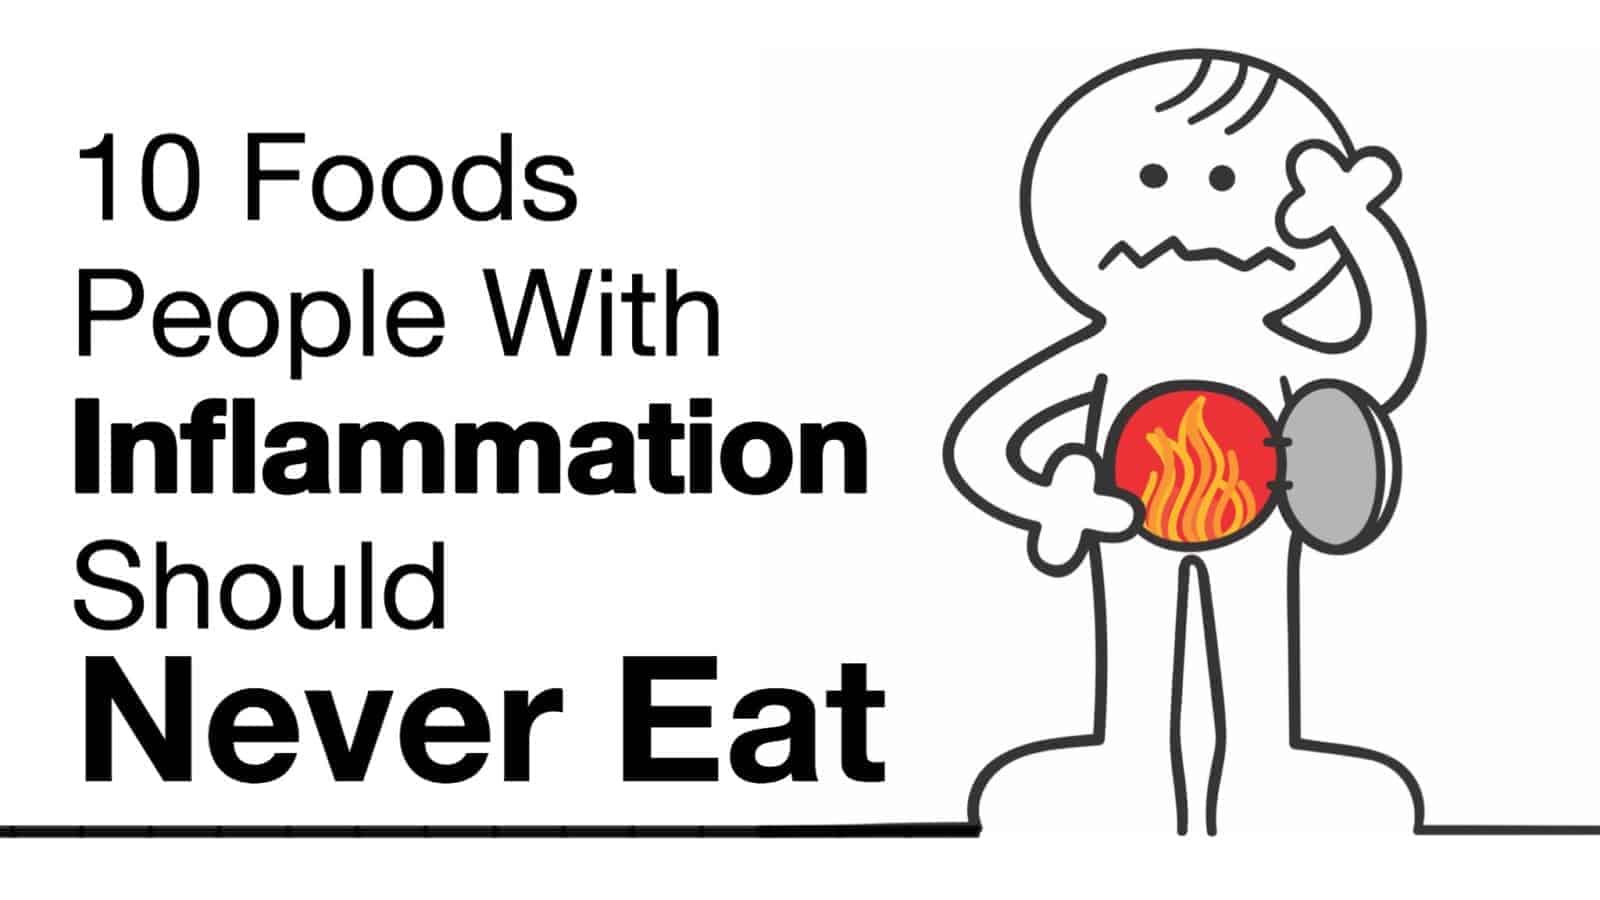 10 Foods People With Inflammation Should Never Eat